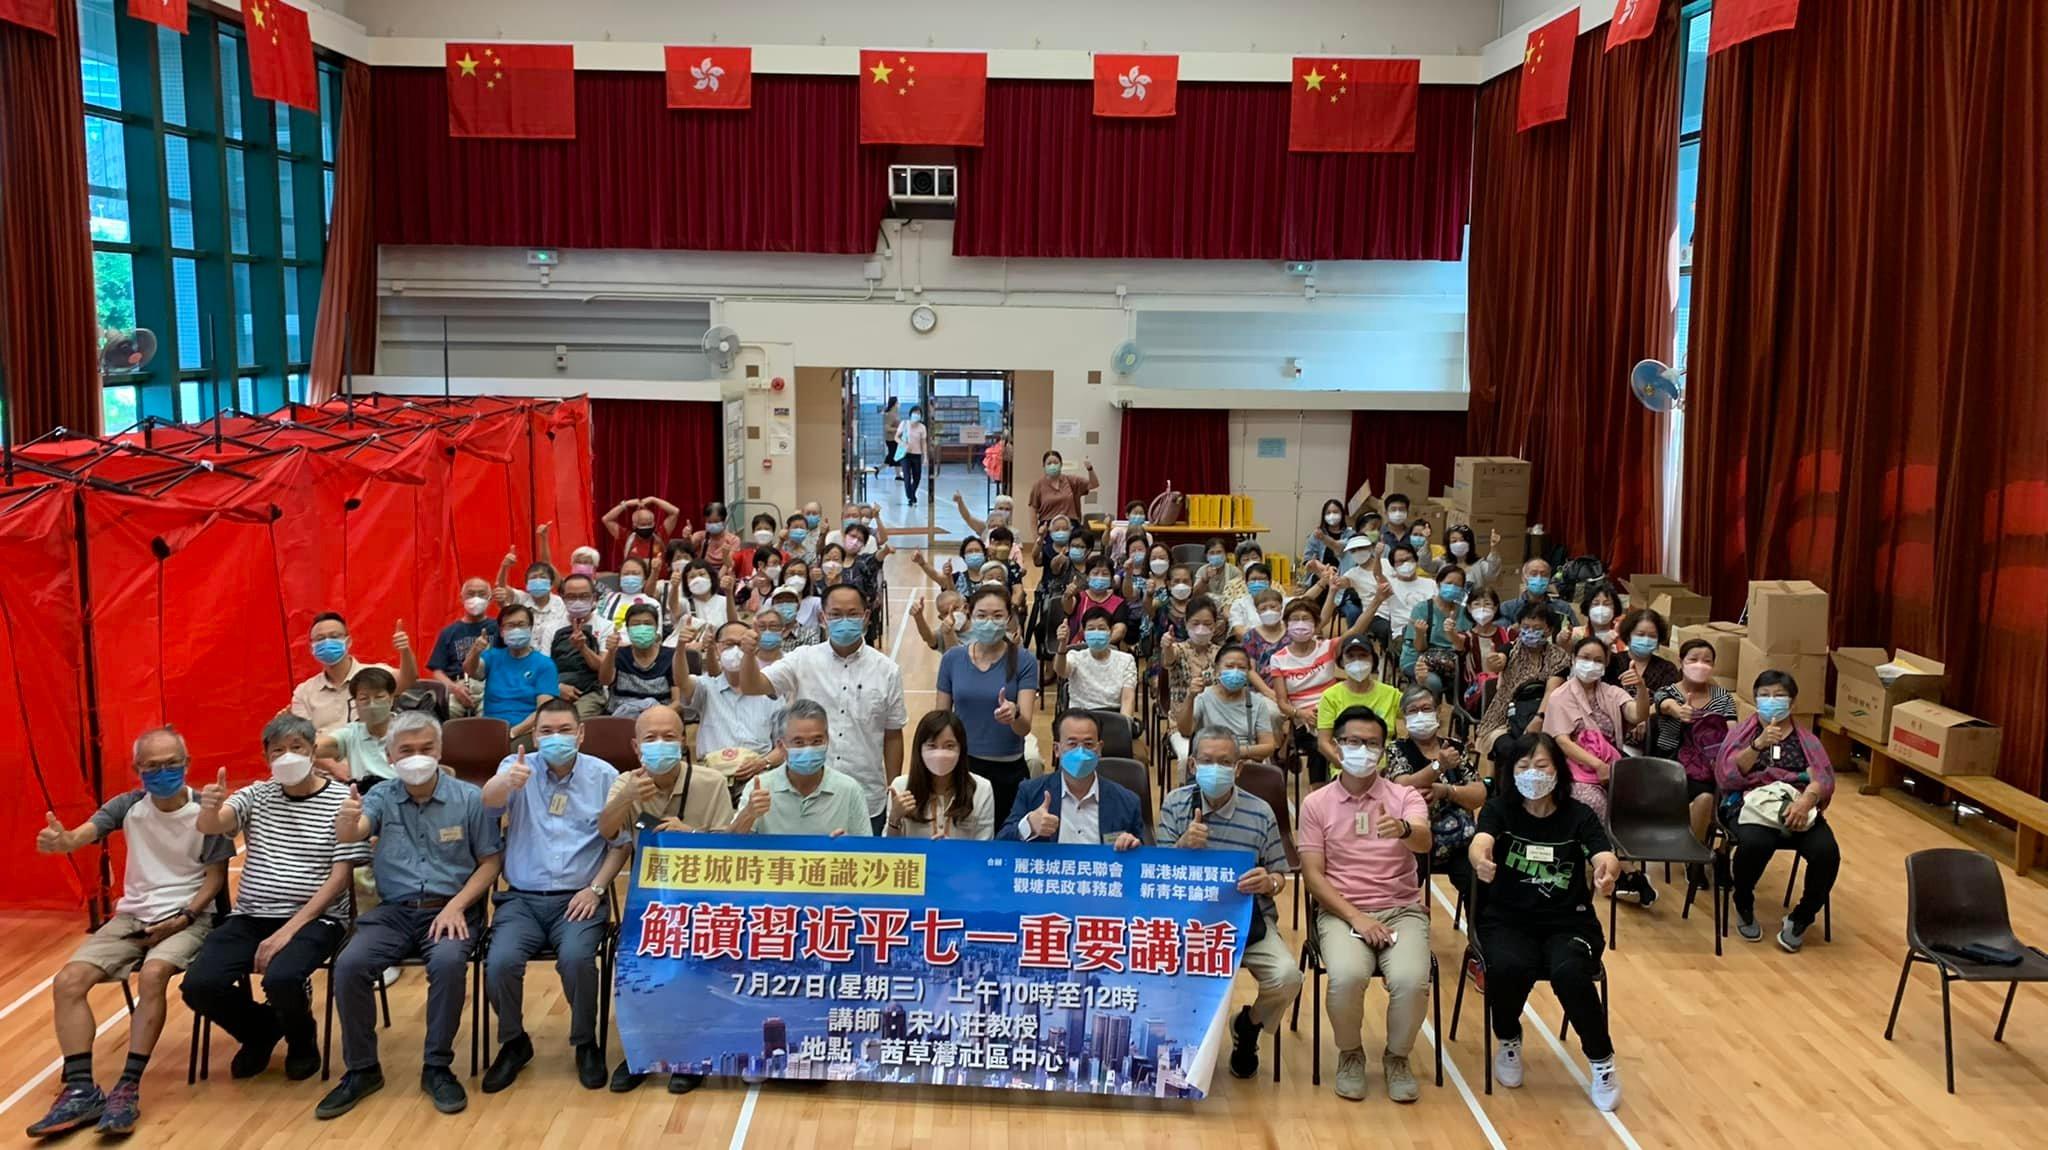 The Kwun Tong District Office, together with the Laguna City Residents' Association, the Laguna City Lai Yin Women Association and the New Youth Forum, jointly held "Session to Learn About the Spirit of President Xi's Important Speech" at Sai Tso Wan Neighbourhood Community Centre on July 27. Photo shows Professor of the Center for Basic Laws of Hong Kong and Macau Special Administrative Regions of Shenzhen University Dr Song Xiaozhuang (front row, third right); the Vice Chairman of the Kwun Tong District Council, Mr Lui Tung-hai (front row, fourth right); and the Assistant District Officer (Kwun Tong), Miss Cherry Sum (front row, fifth right), together with other guests and participants at the session. 